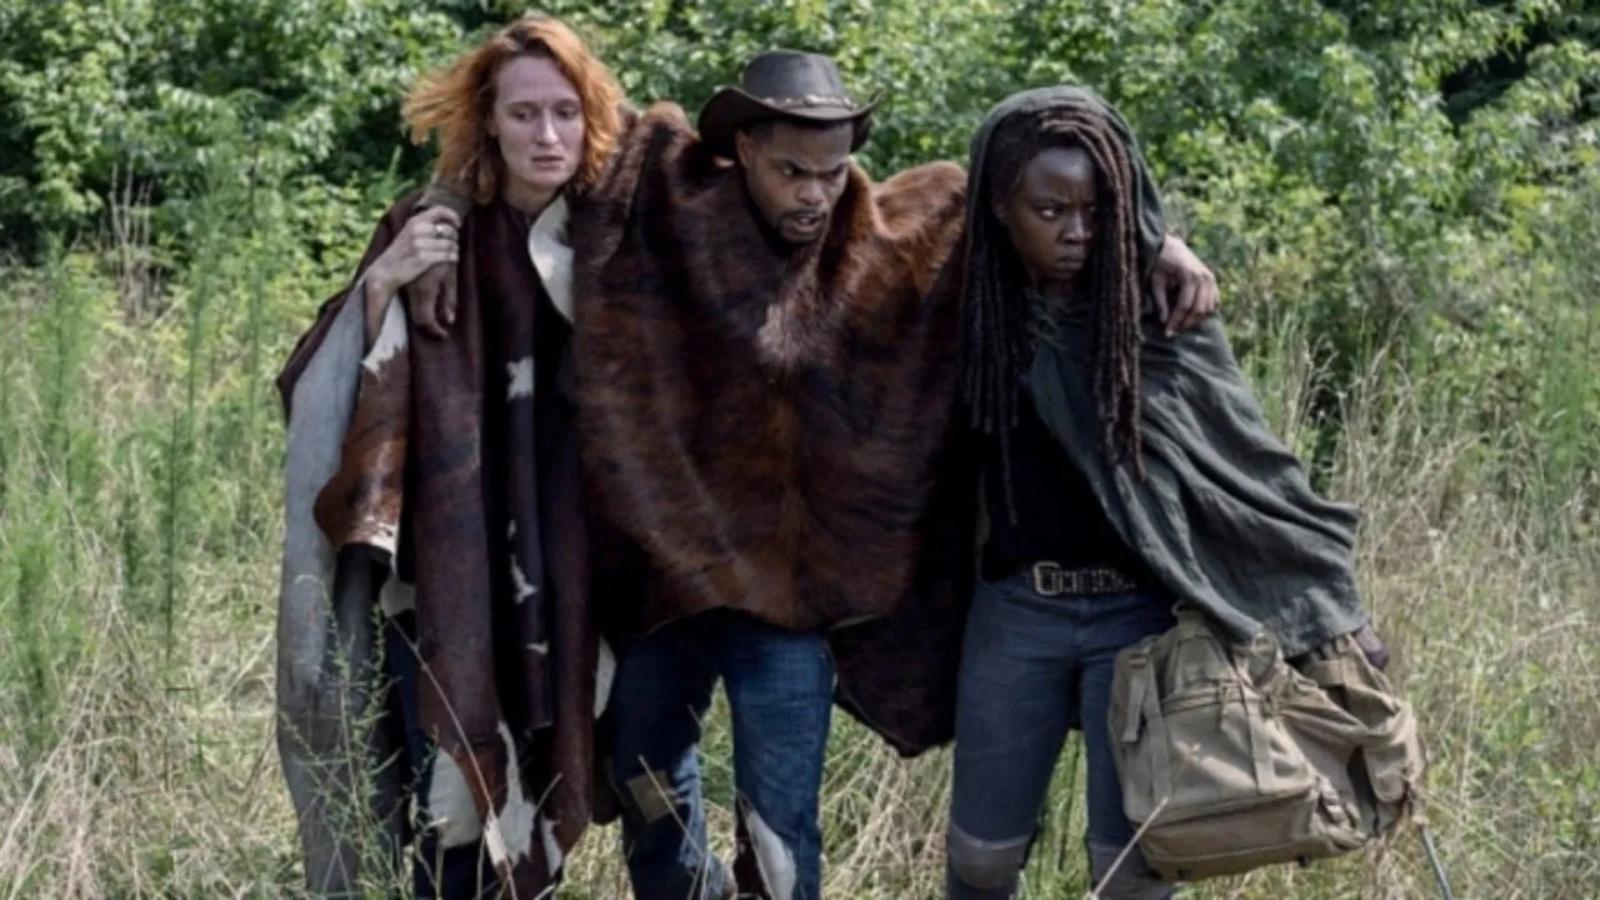 King Bach as Bailey in The Walking Dead, being carried by Michonne and Aiden